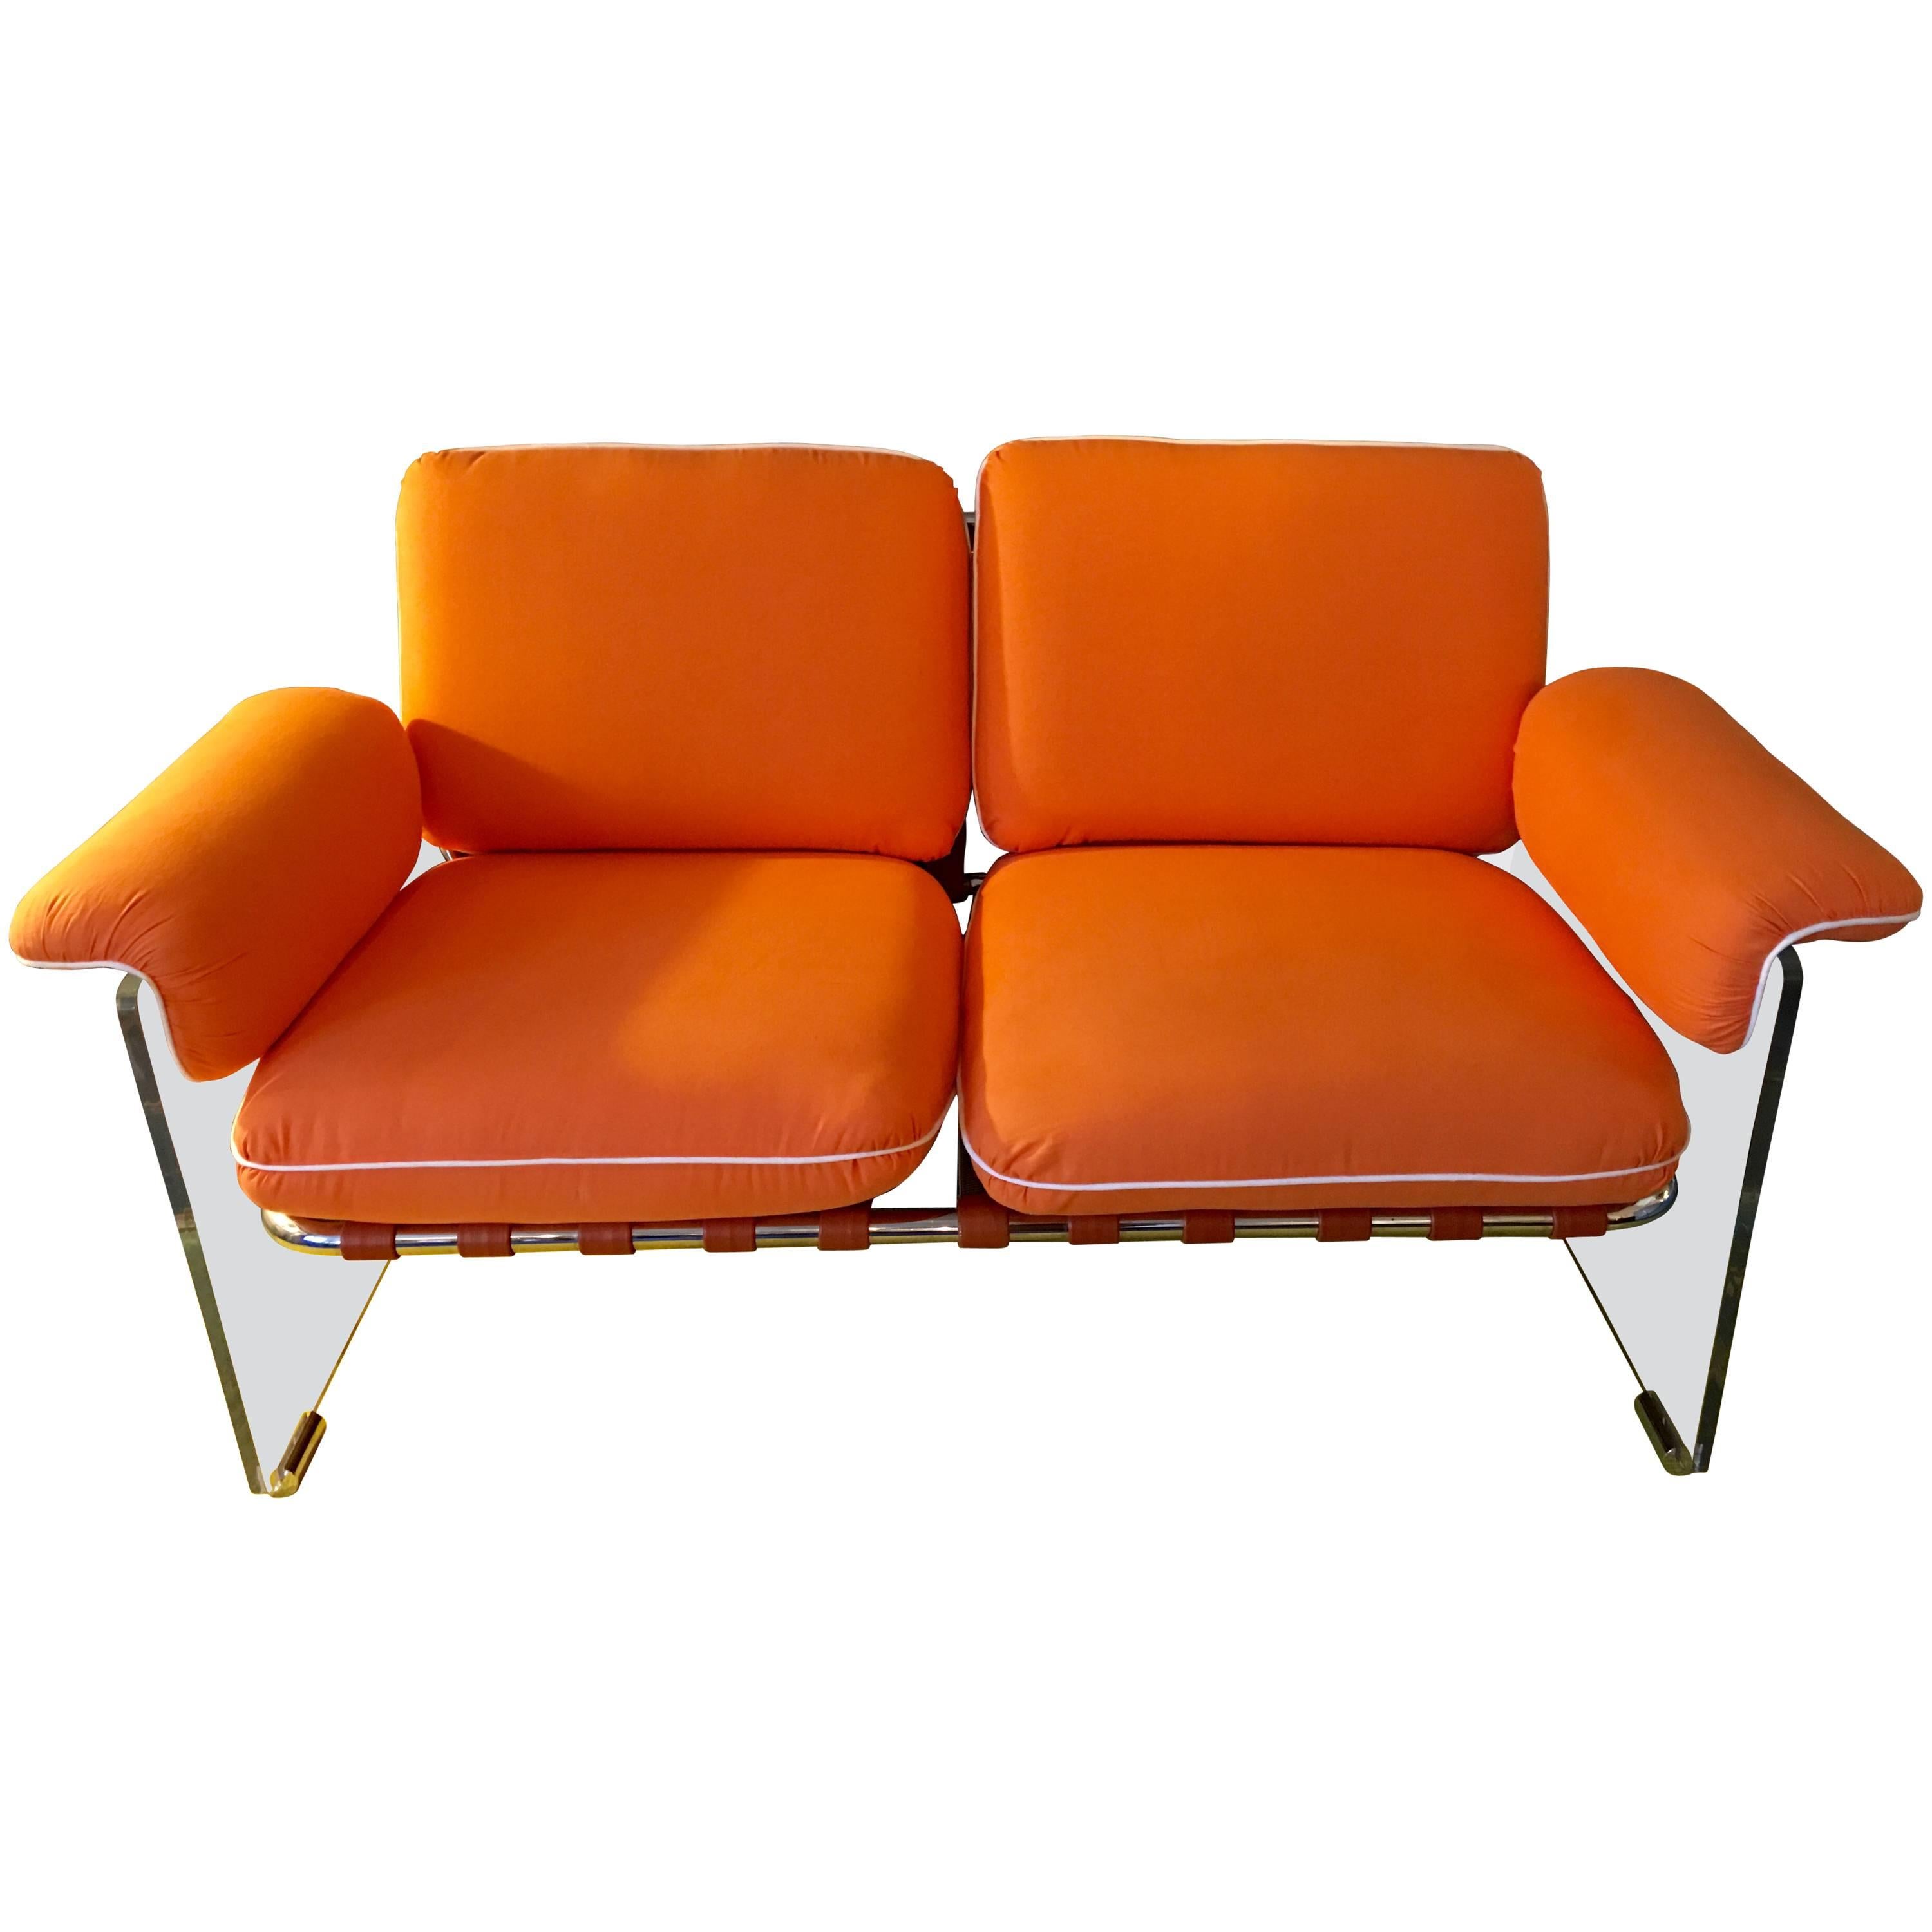 Lucite and Chrome "Argenta" Loveseat by Pace For Sale